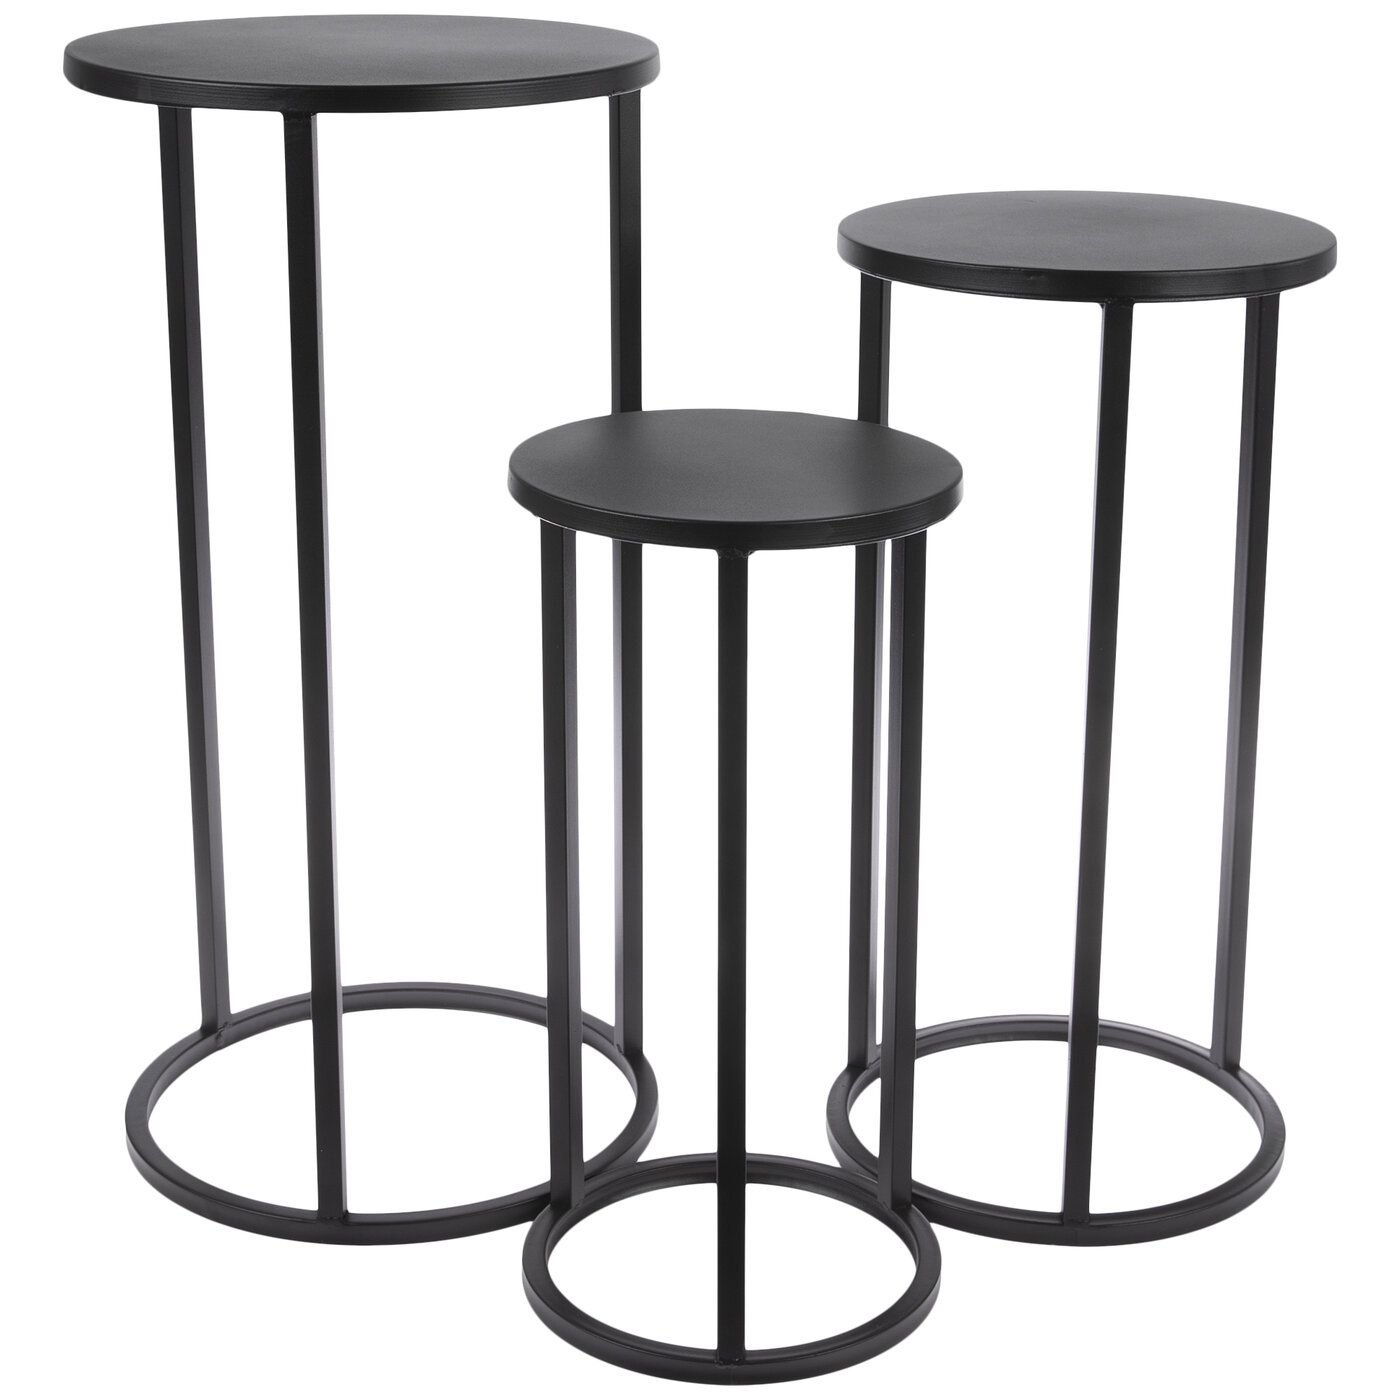 Black Metal Plant Stand Set – Tall | Hobby Lobby | 81057483 Inside Black Plant Stands (View 14 of 15)